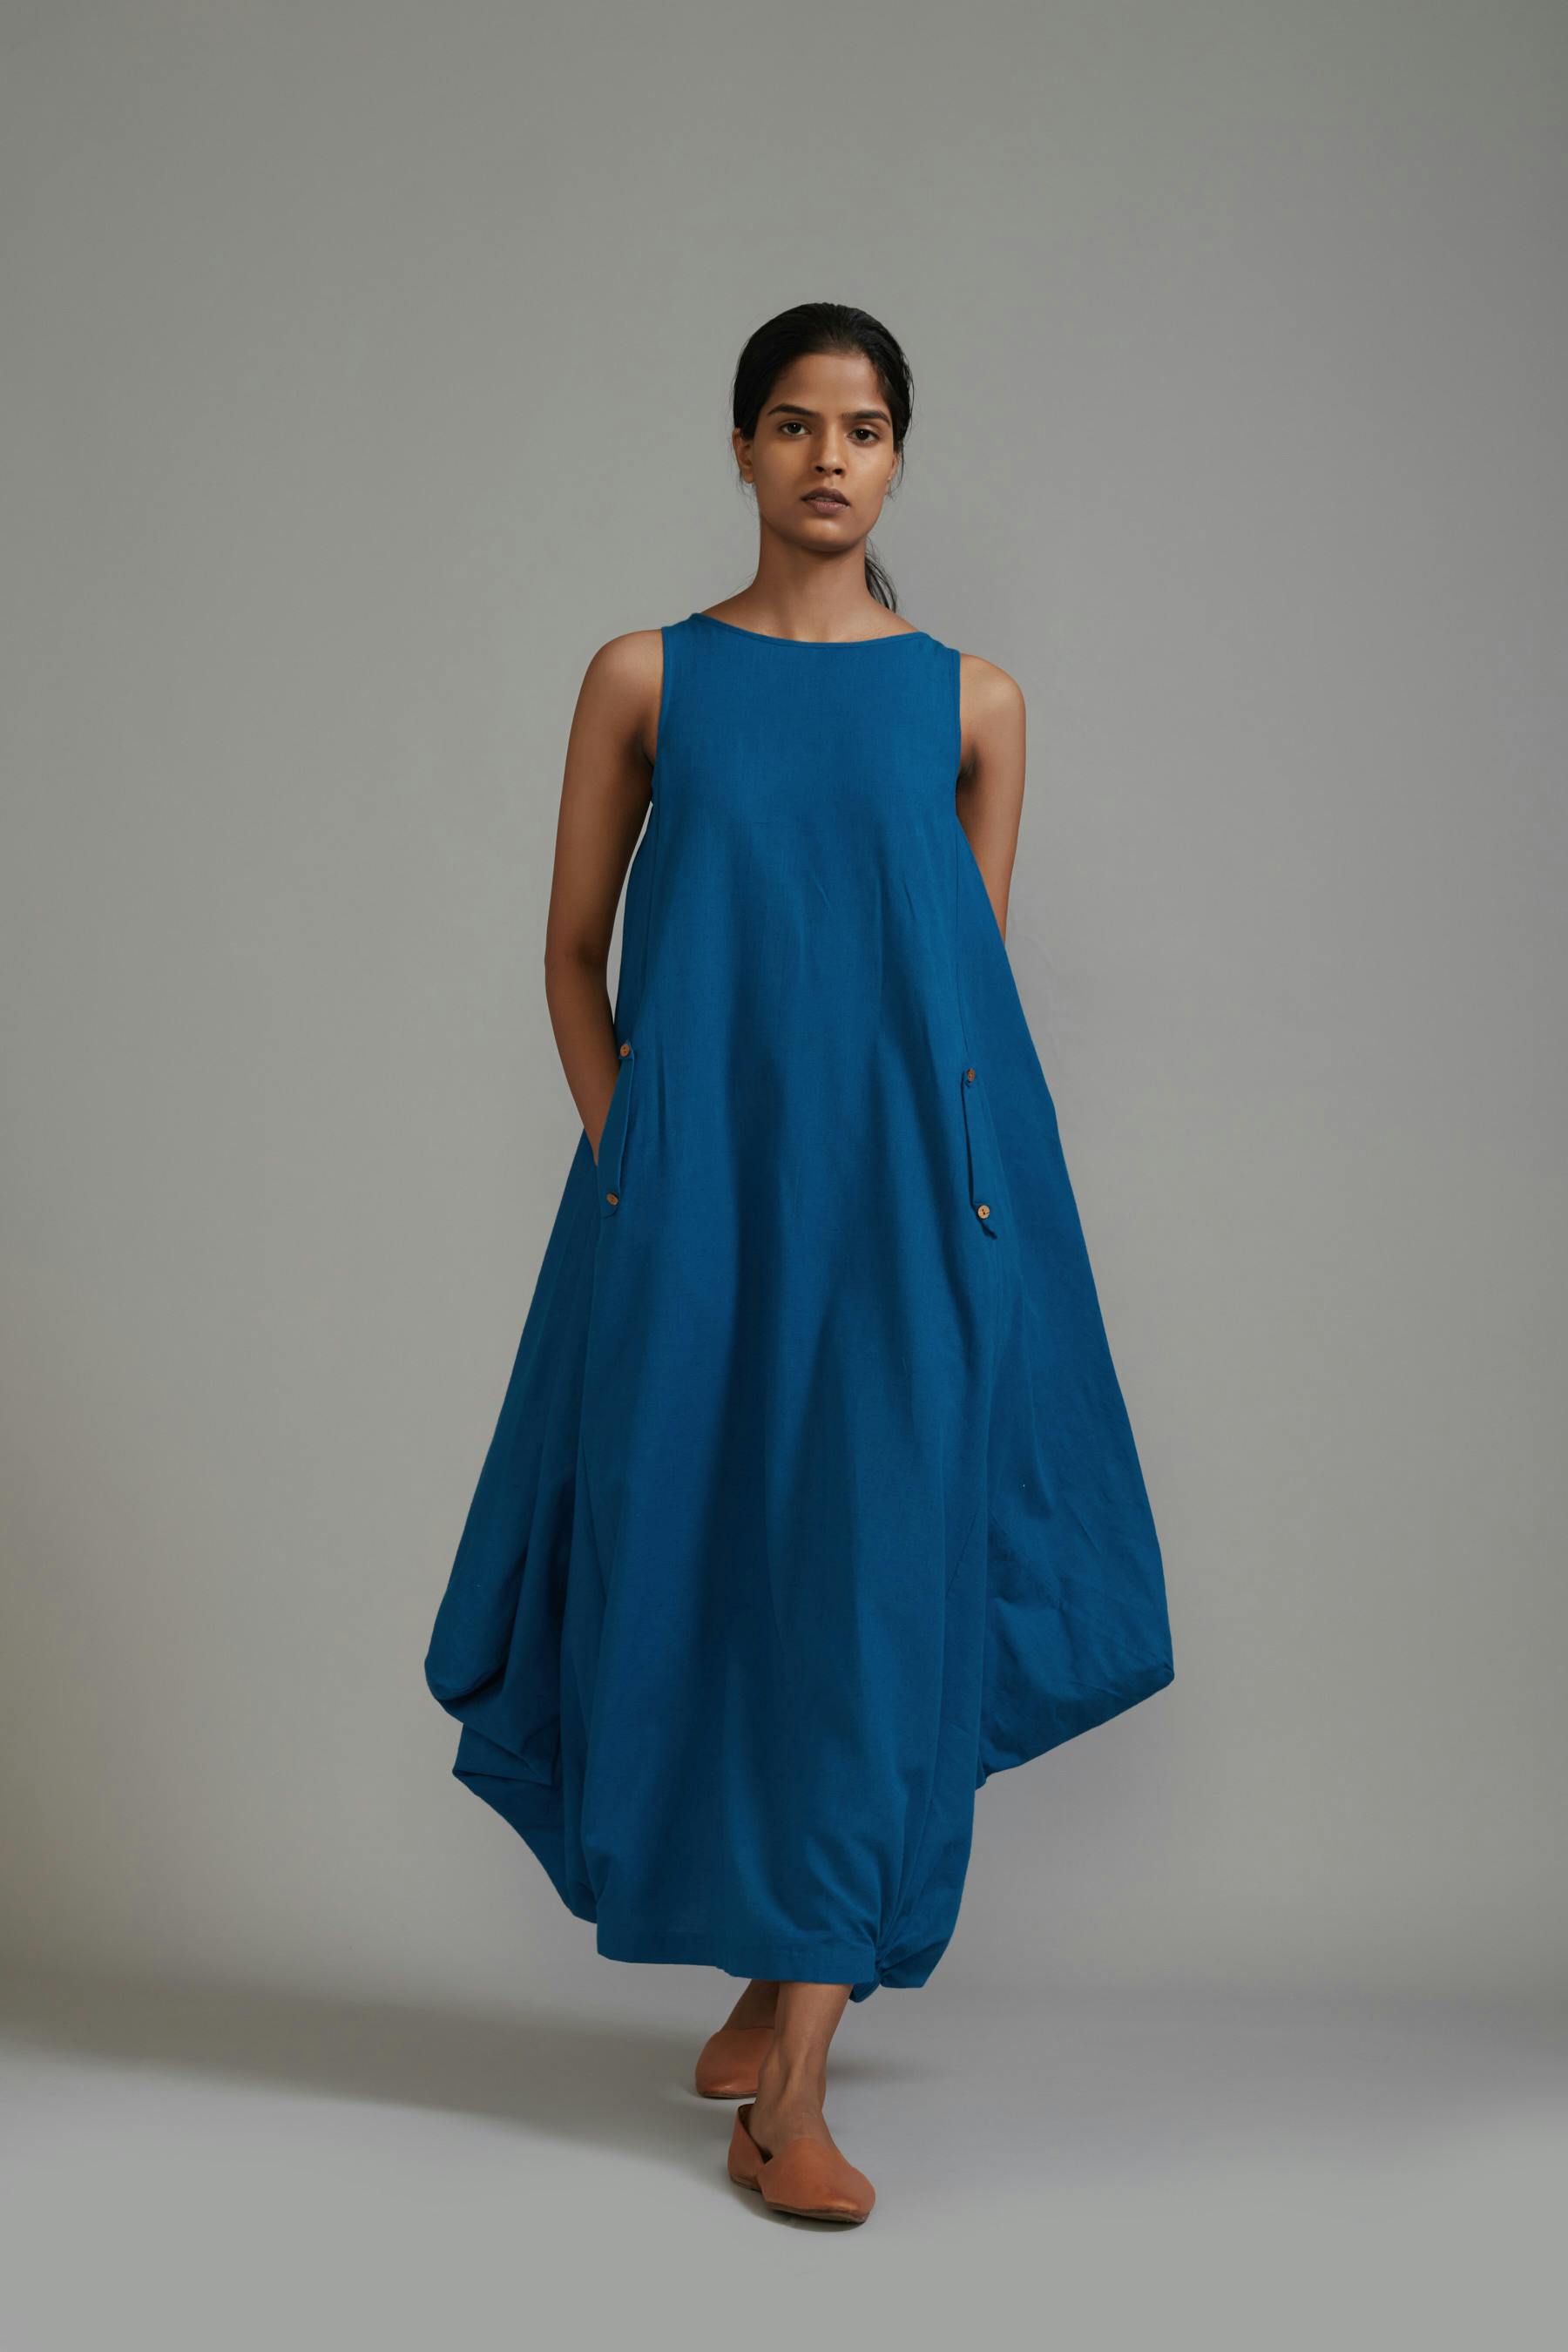 Blue New Vari Aakar , a product by Style Mati